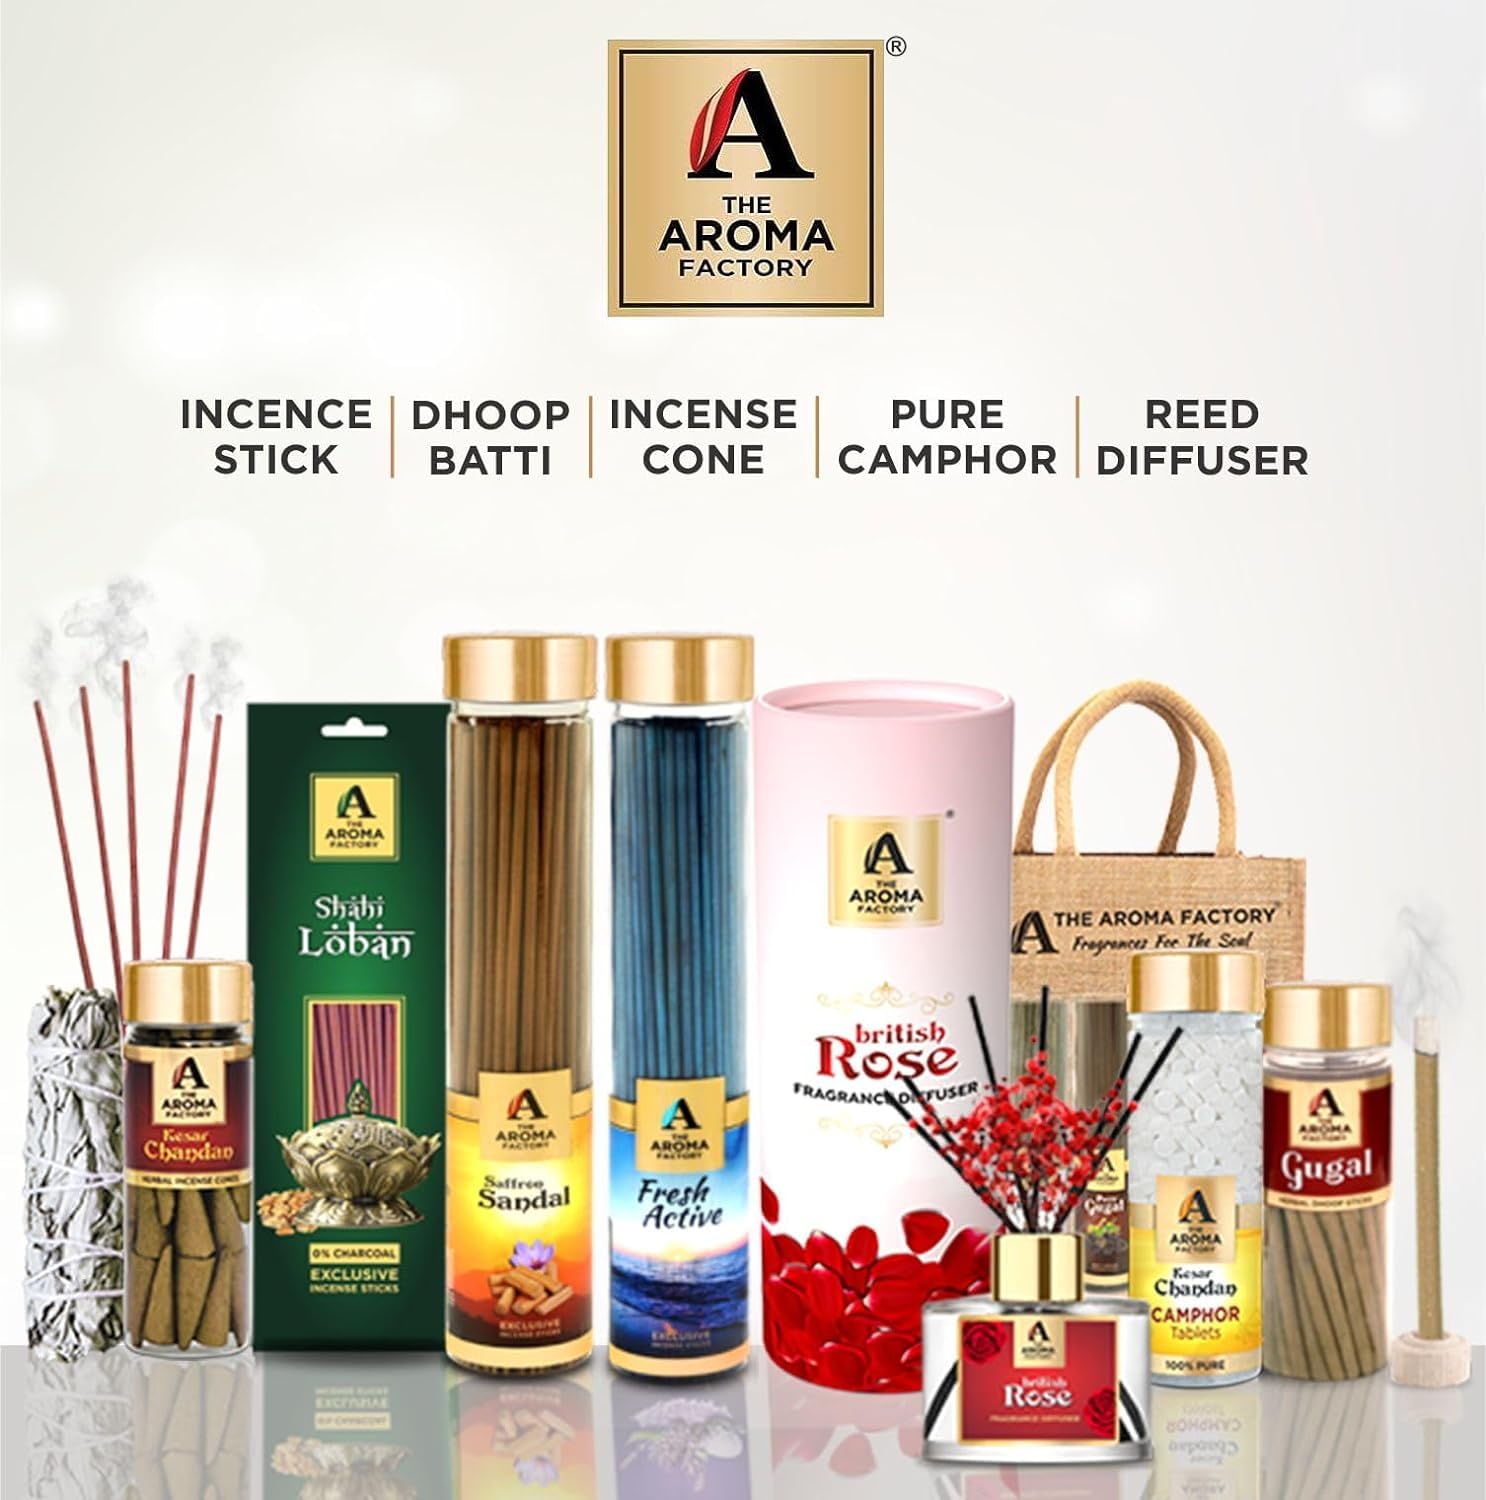 The Aroma Factory Happy Birthday Mama Gift with Card (25 Swad Candy, Pineapple Agarbatti Bottle, Lavender Dhoopbatti) in Jute Bag